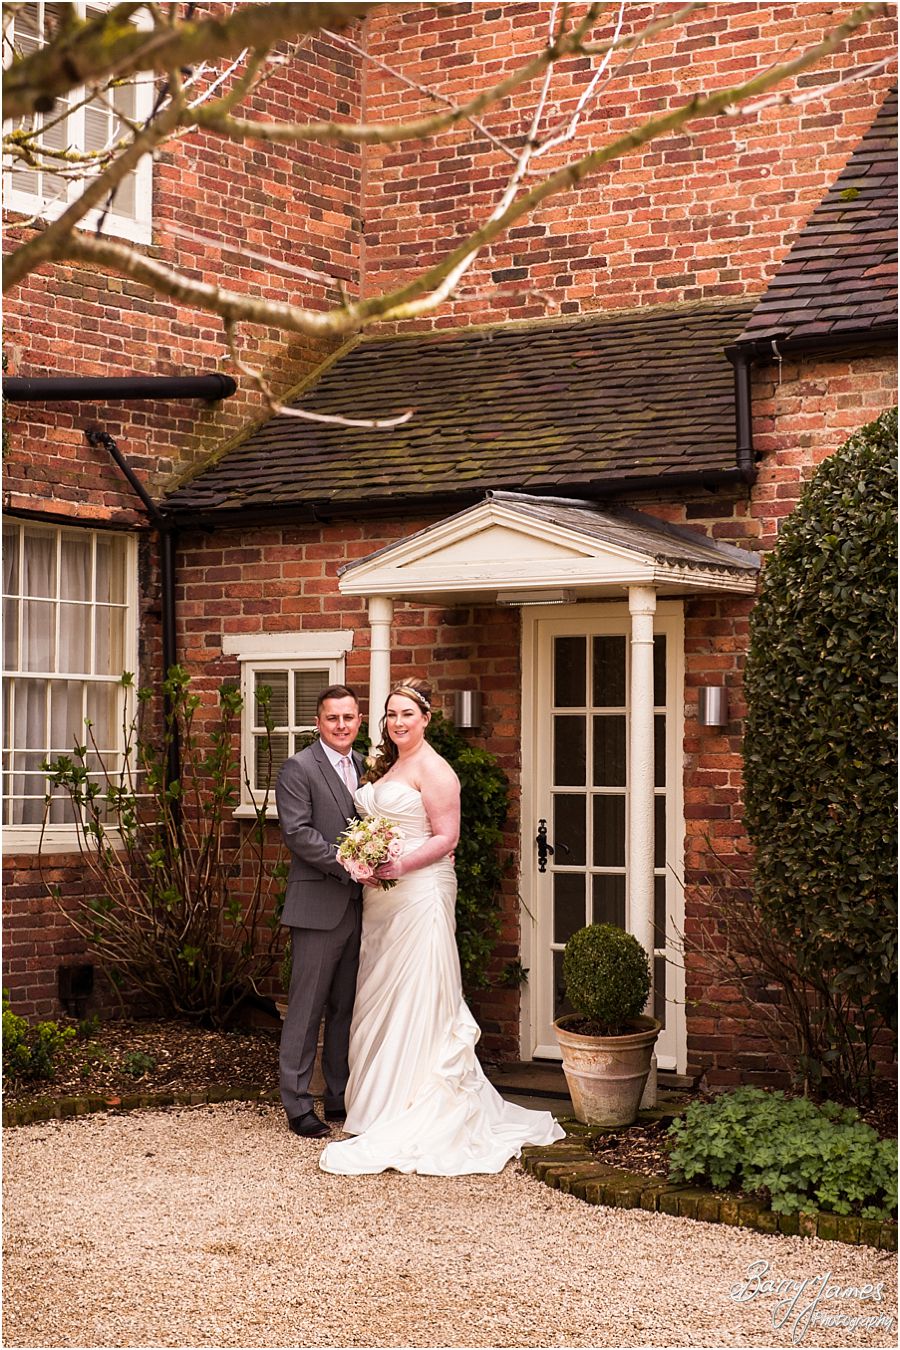 Creative relaxed portraits of the Bride and Groom around the wonderful grounds at Alrewas Hayes in Burton upon Trent by Contemporary and Creative Wedding Photographer Barry James